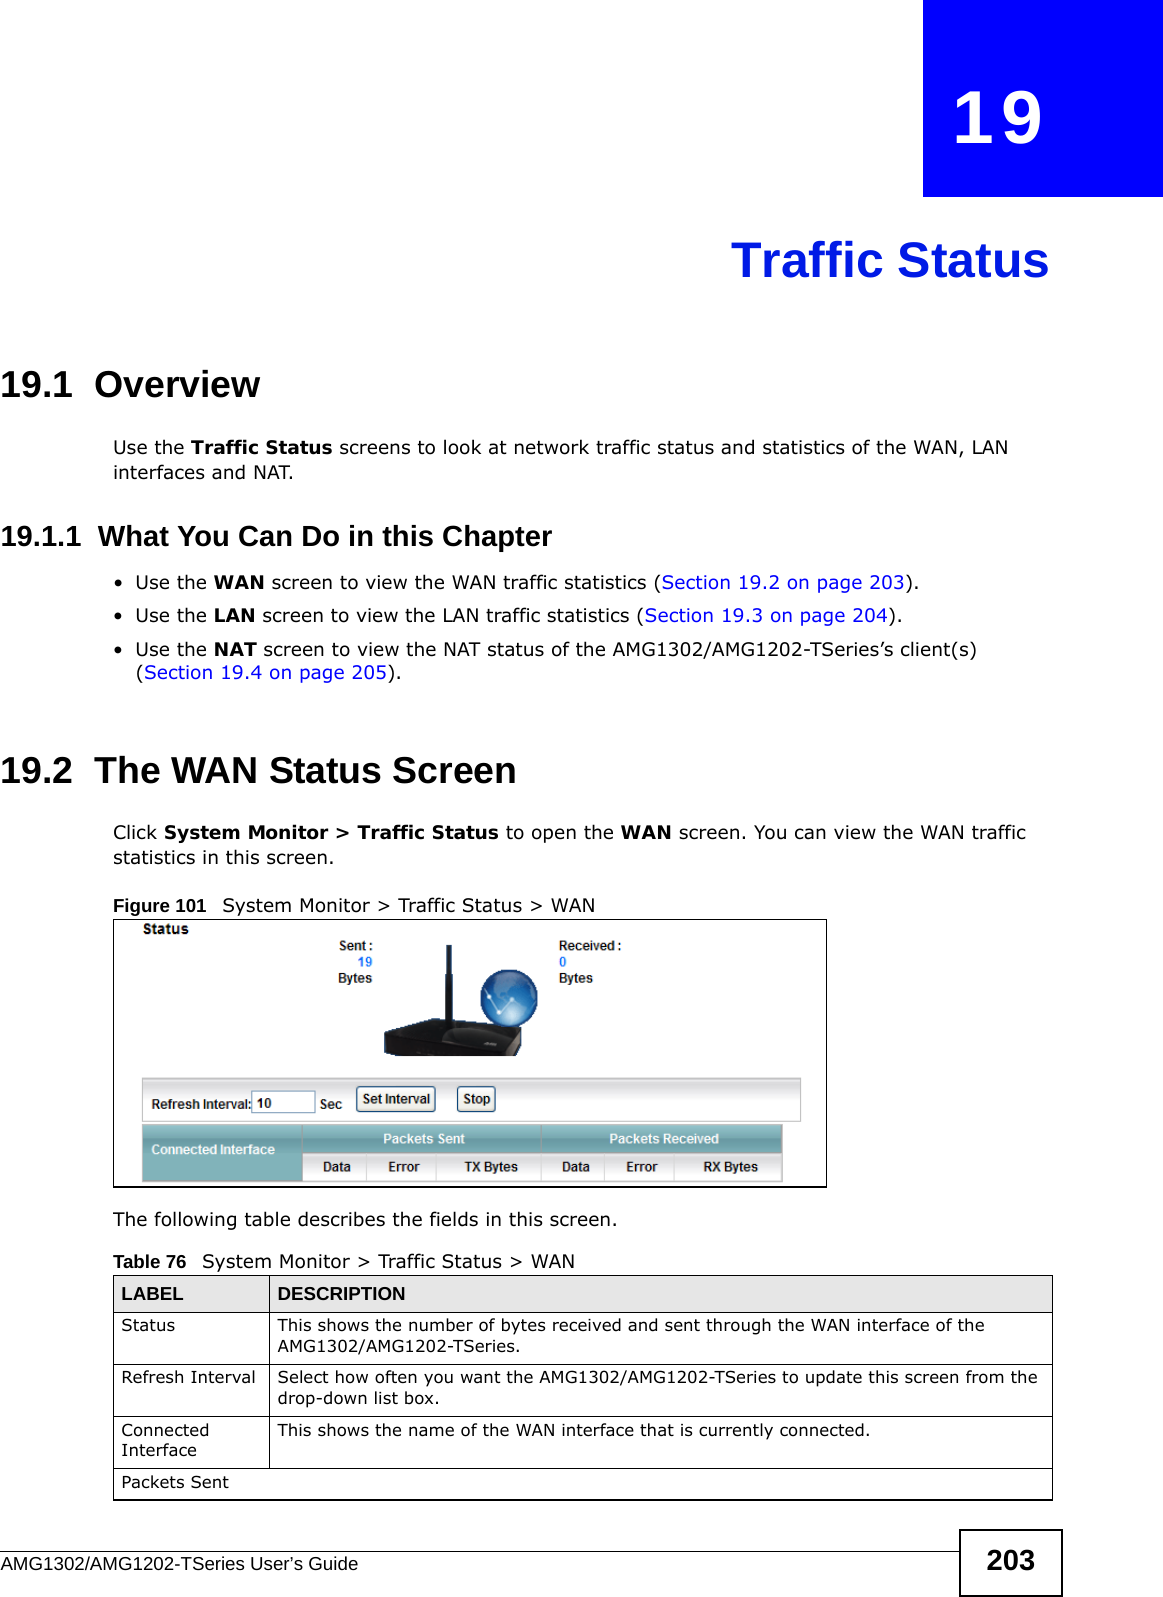 AMG1302/AMG1202-TSeries User’s Guide 203CHAPTER   19Traffic Status19.1  OverviewUse the Traffic Status screens to look at network traffic status and statistics of the WAN, LAN interfaces and NAT. 19.1.1  What You Can Do in this Chapter•Use the WAN screen to view the WAN traffic statistics (Section 19.2 on page 203).•Use the LAN screen to view the LAN traffic statistics (Section 19.3 on page 204).•Use the NAT screen to view the NAT status of the AMG1302/AMG1202-TSeries’s client(s) (Section 19.4 on page 205).19.2  The WAN Status Screen Click System Monitor &gt; Traffic Status to open the WAN screen. You can view the WAN traffic statistics in this screen.Figure 101   System Monitor &gt; Traffic Status &gt; WANThe following table describes the fields in this screen.   Table 76   System Monitor &gt; Traffic Status &gt; WANLABEL DESCRIPTIONStatus This shows the number of bytes received and sent through the WAN interface of the AMG1302/AMG1202-TSeries.Refresh Interval Select how often you want the AMG1302/AMG1202-TSeries to update this screen from the drop-down list box.Connected Interface This shows the name of the WAN interface that is currently connected.Packets Sent 